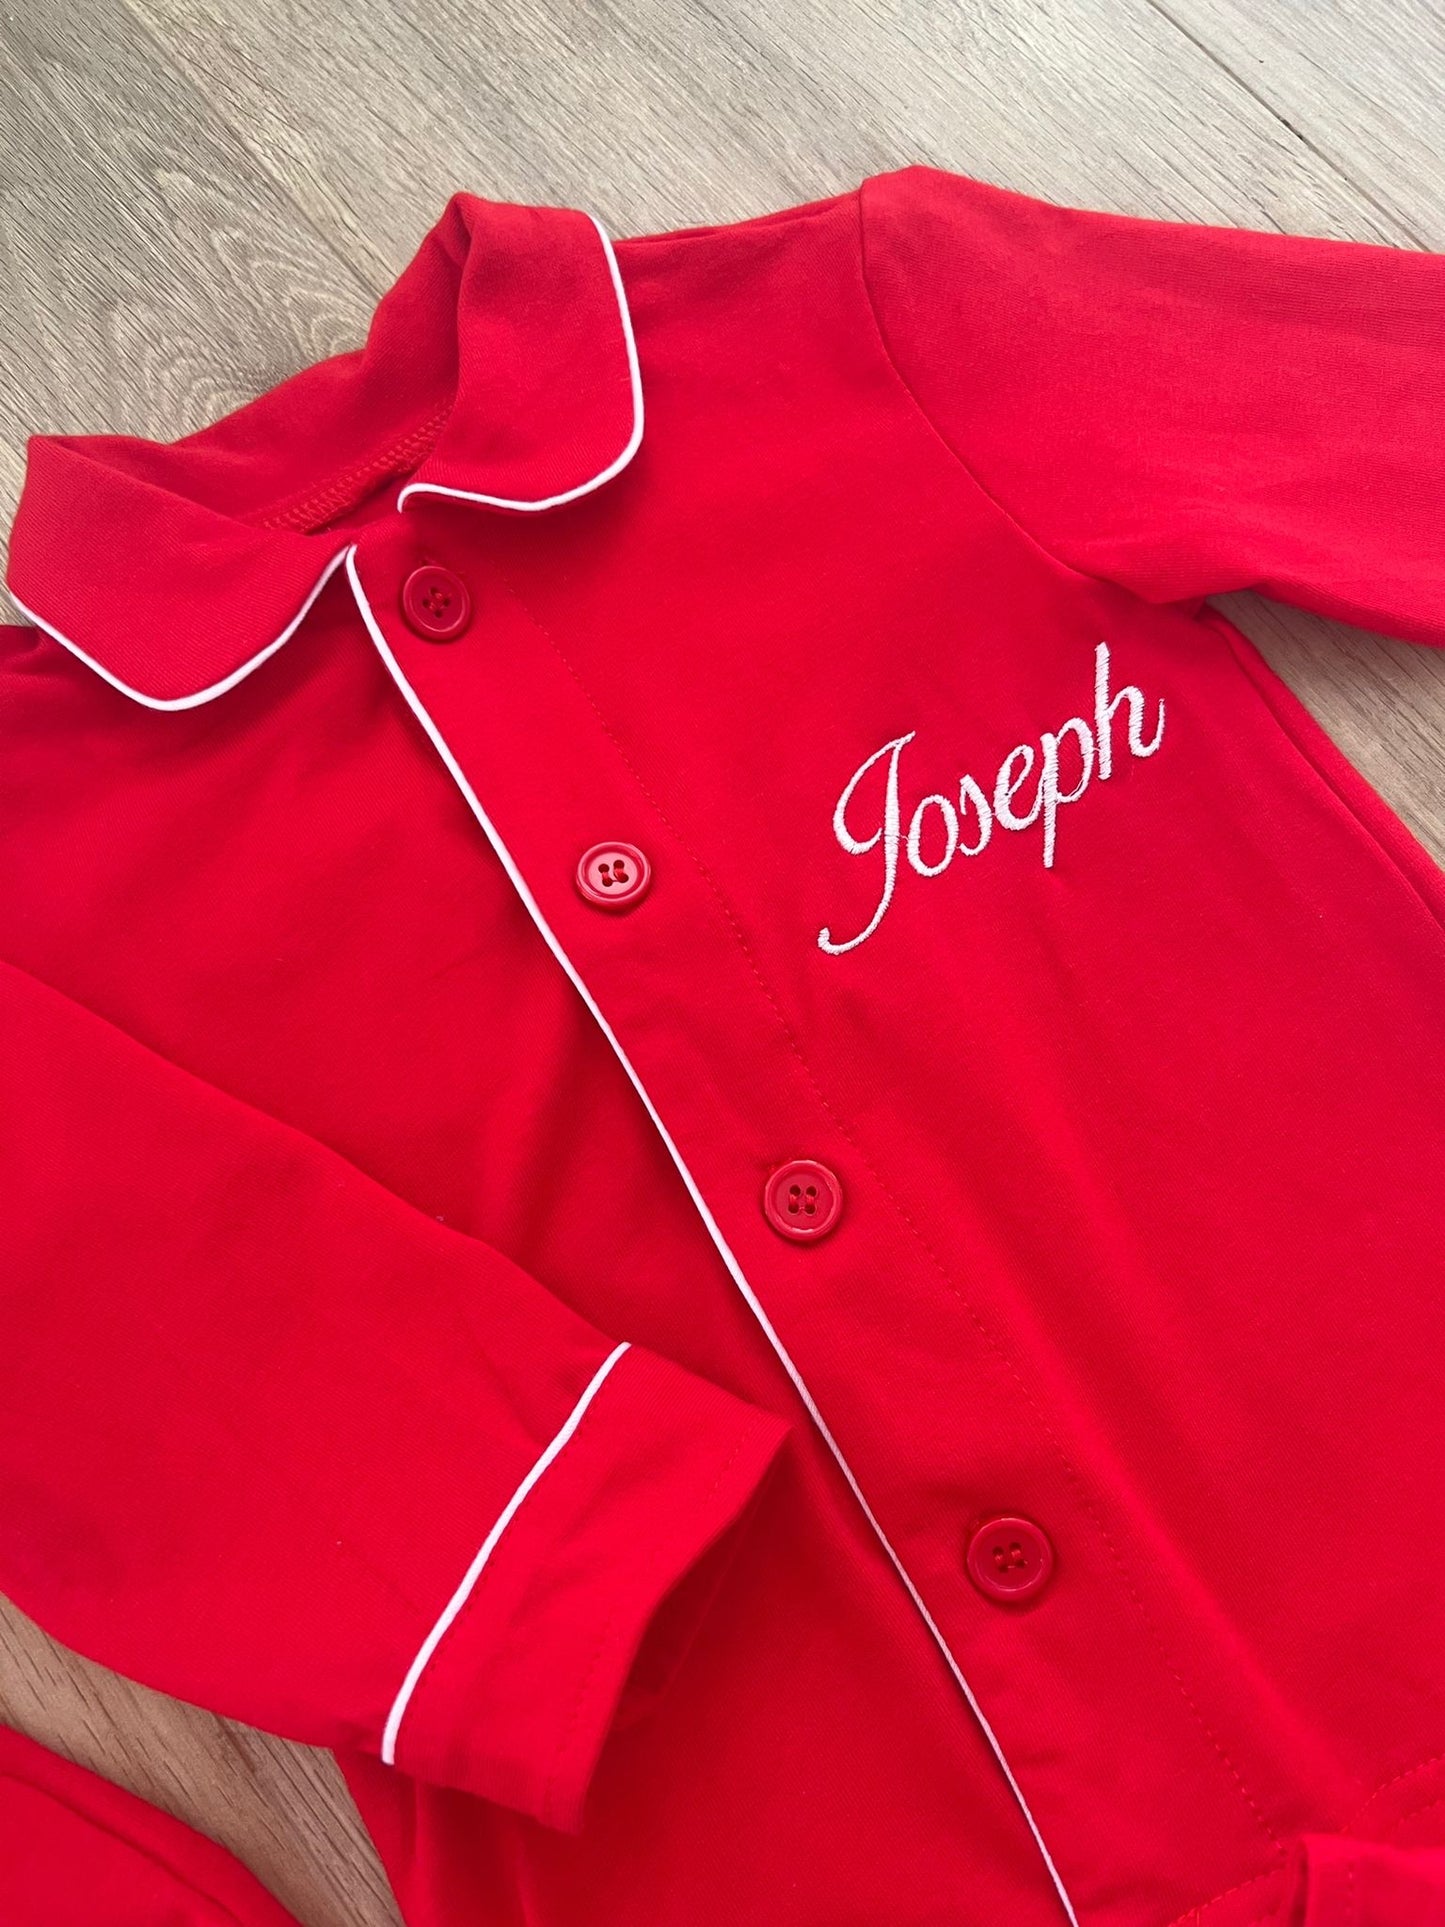 Embroidered Personalised Classic Cotton Christmas pyjamas, Matching Family Sizes!